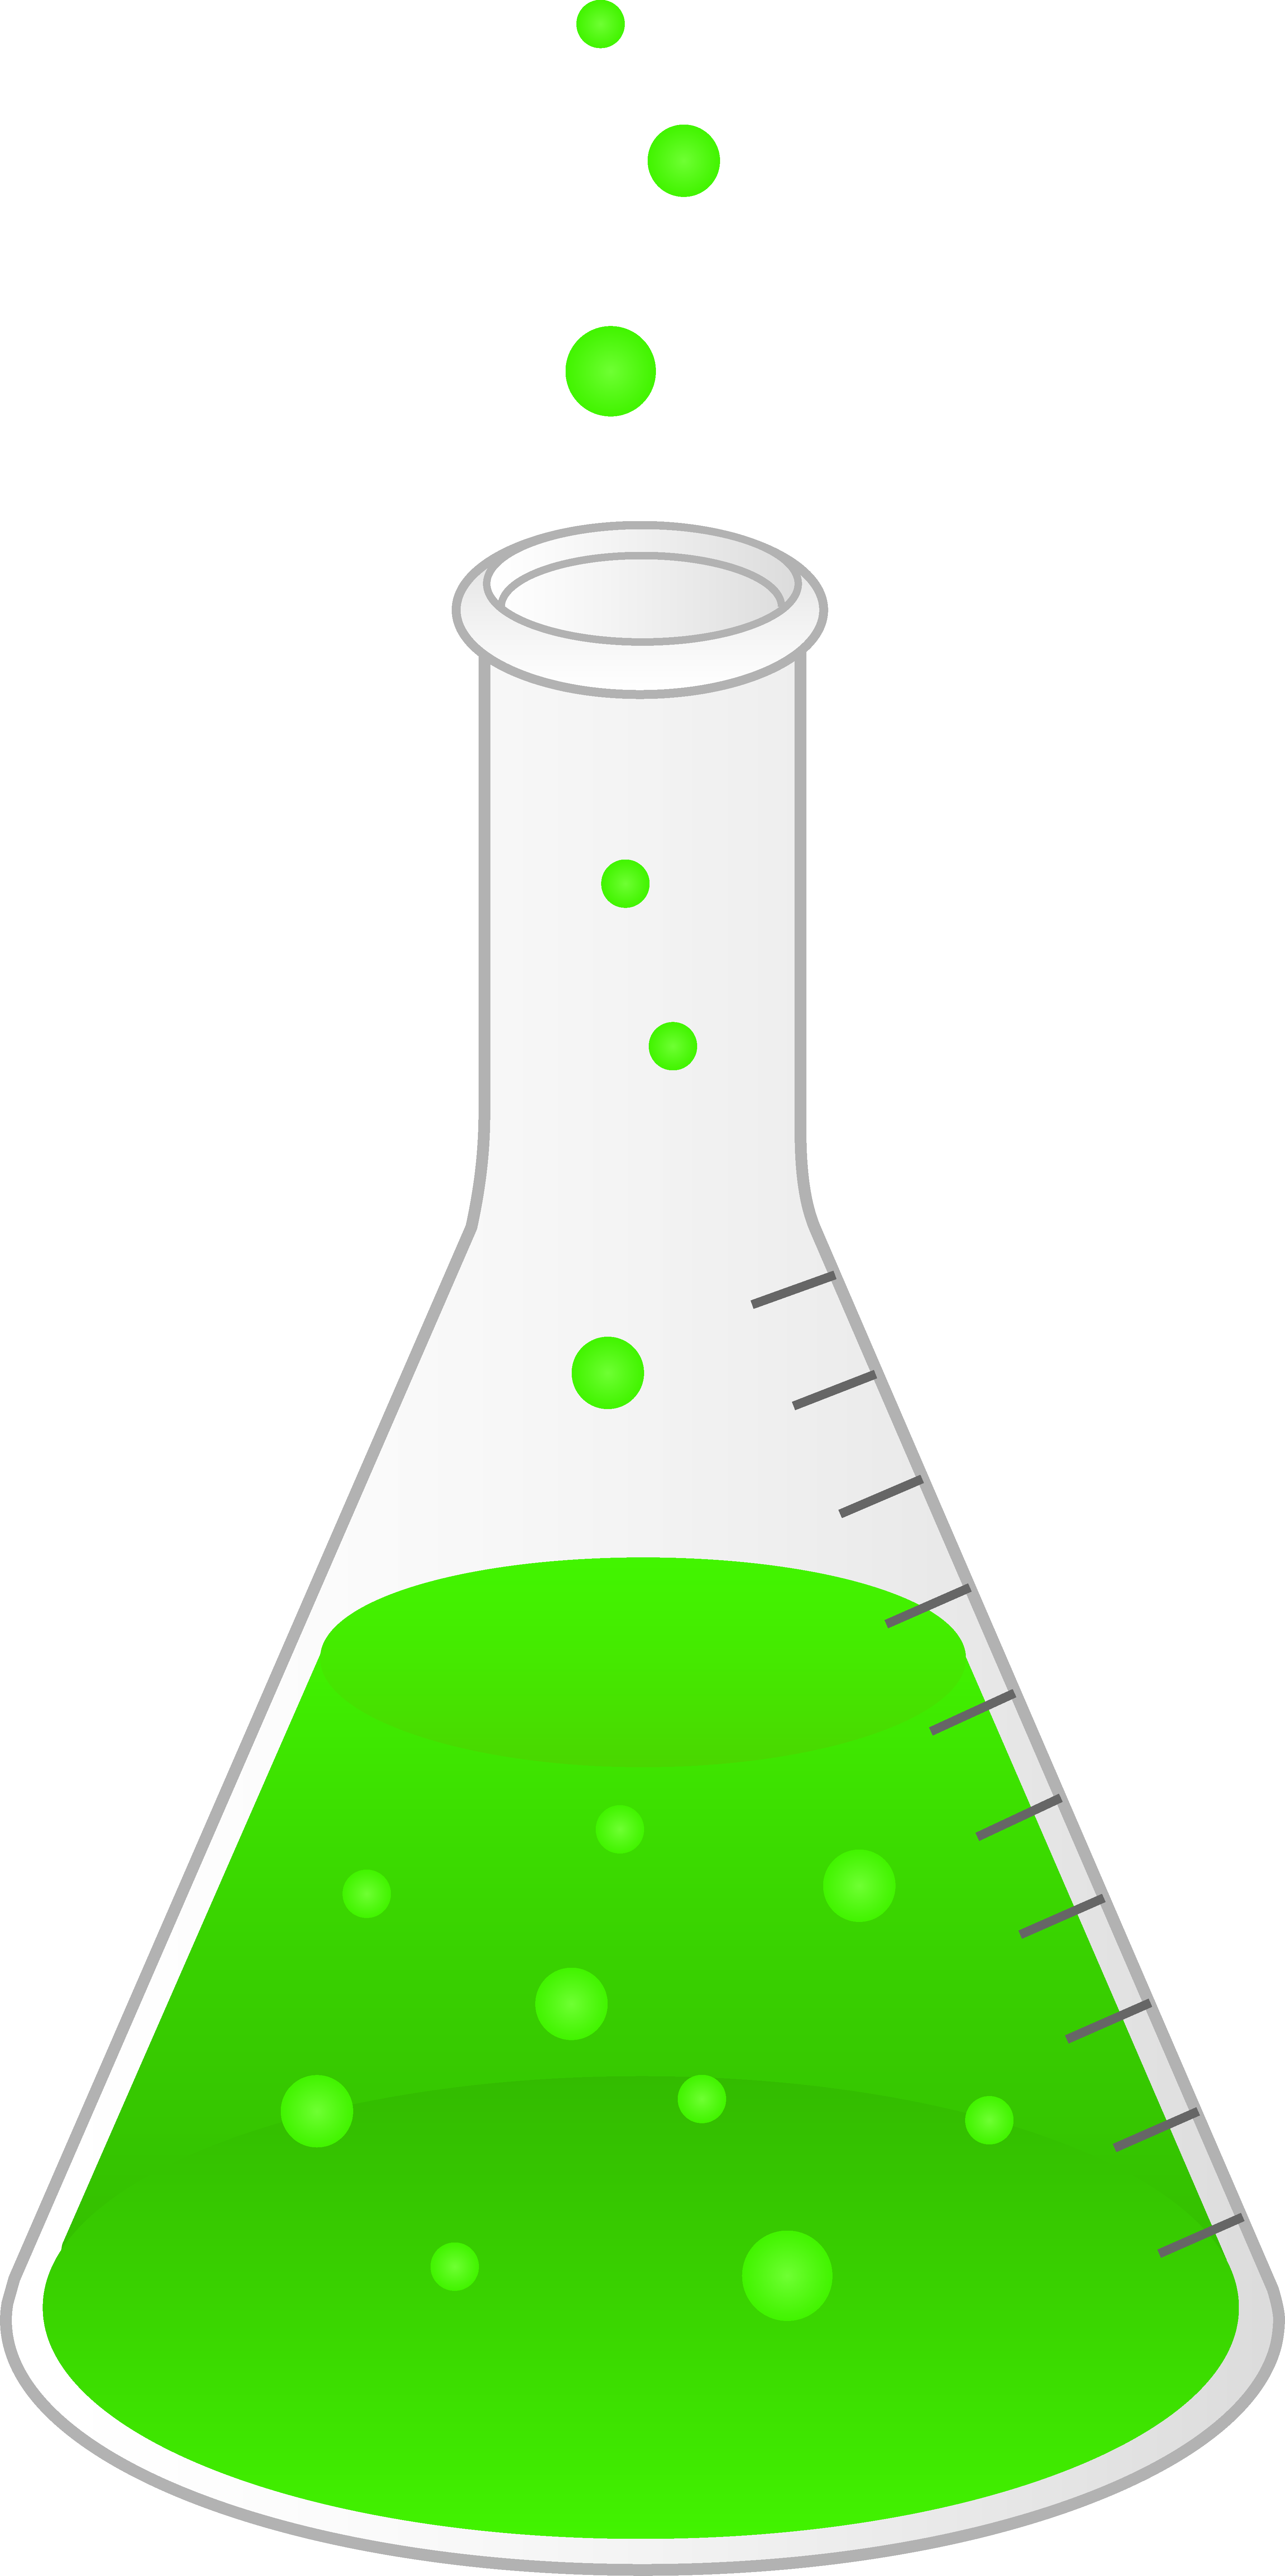 science clipart - photo #40